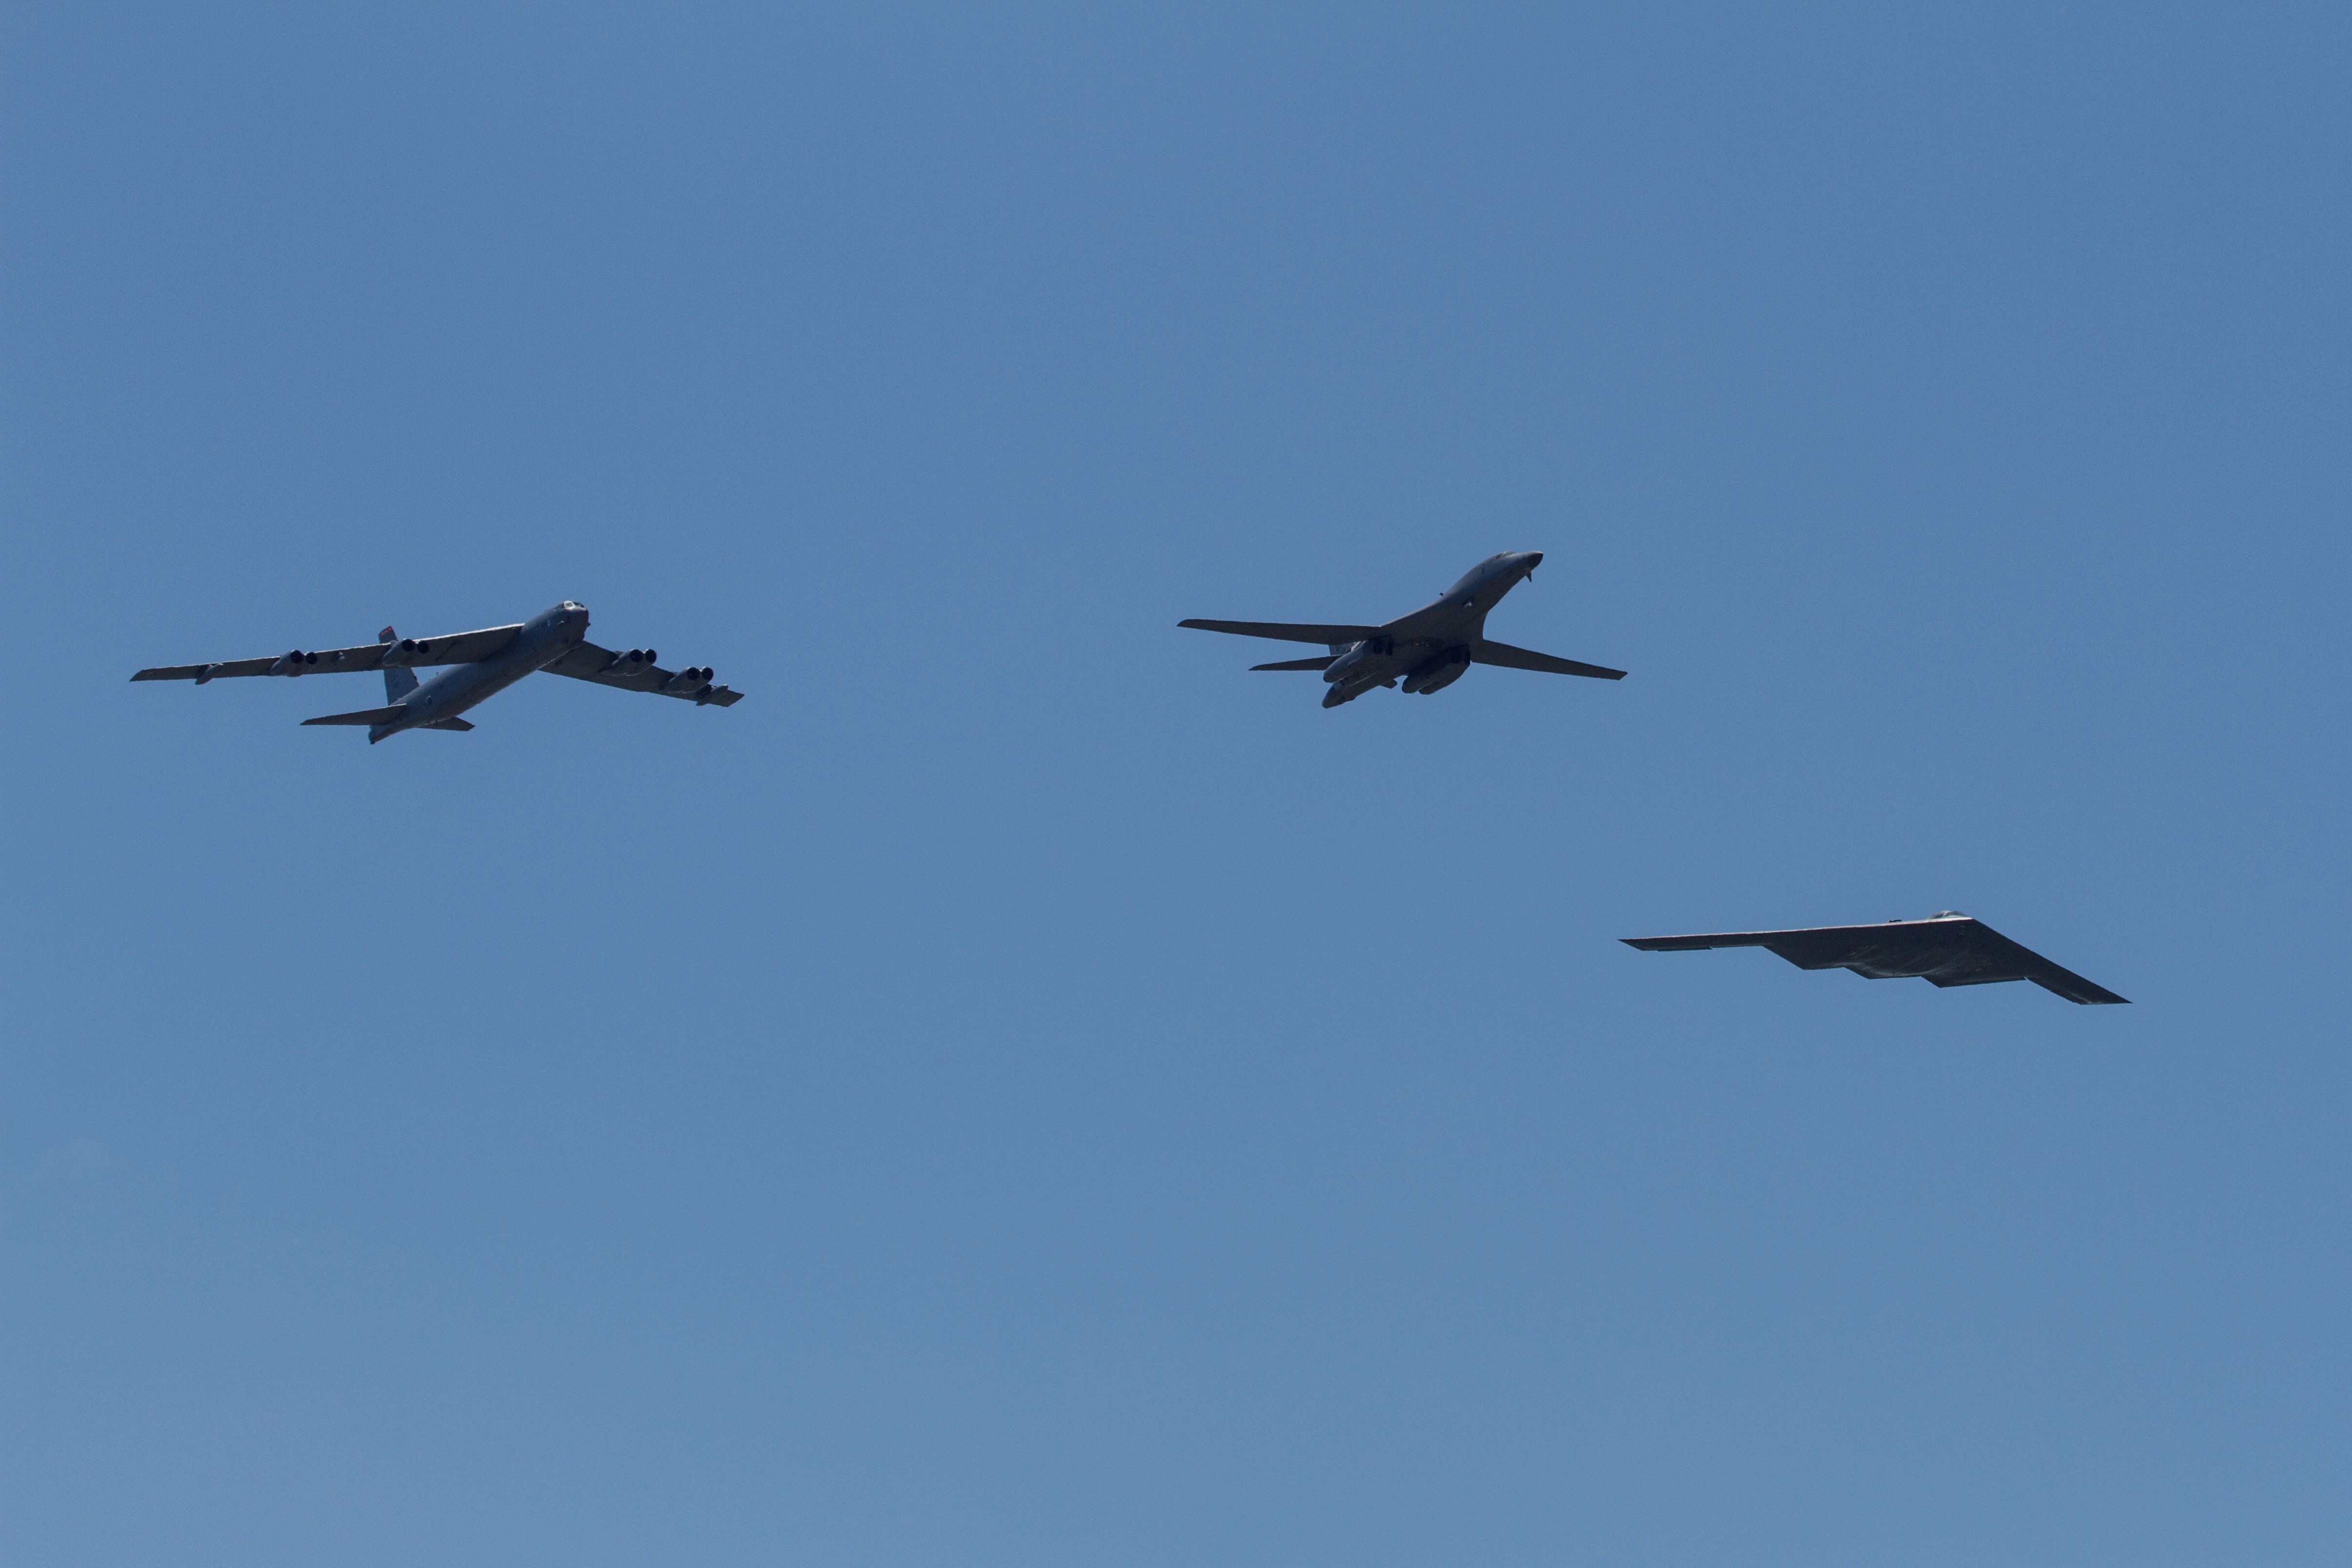 A B-52 Stratofortress, B-1 Lancer, and B-2 Spirit flying in formation at the Dyess AFB air show in 2015.